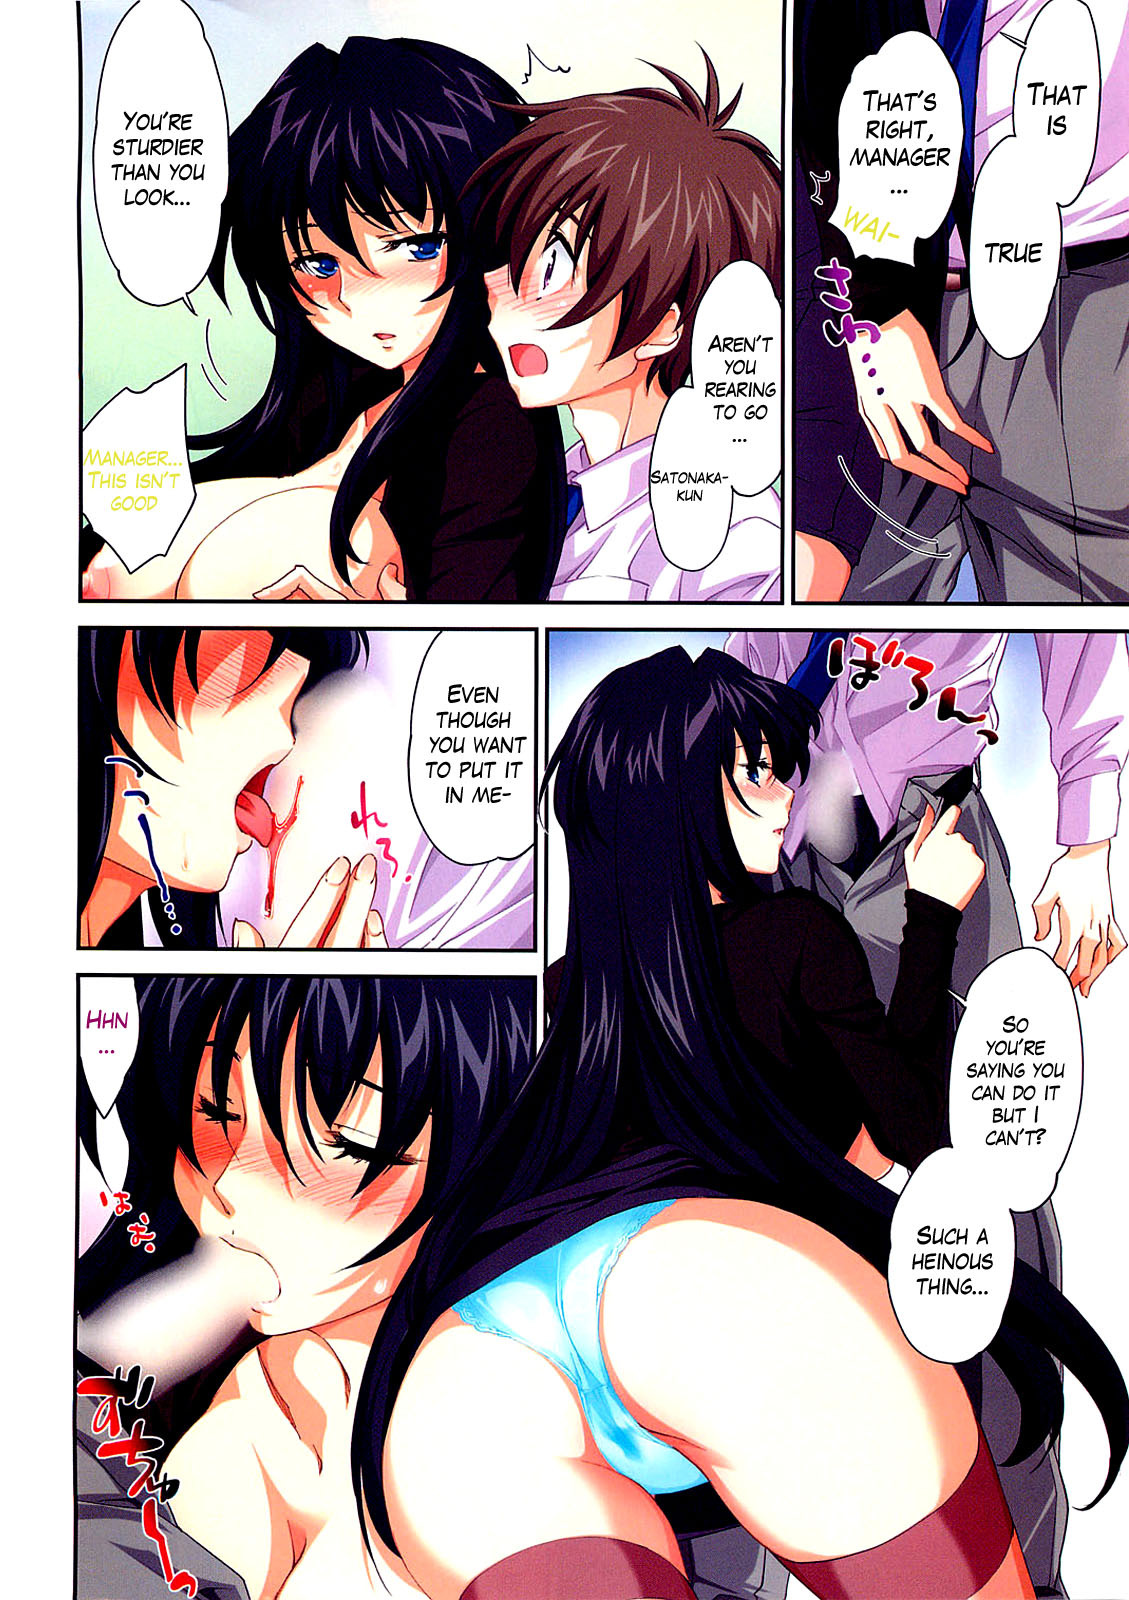 [Yuuki Homura] WORKING WOMAN (COMIC HOTMiLK 2012-09) [English] [The Lusty Lady Project] page 2 full